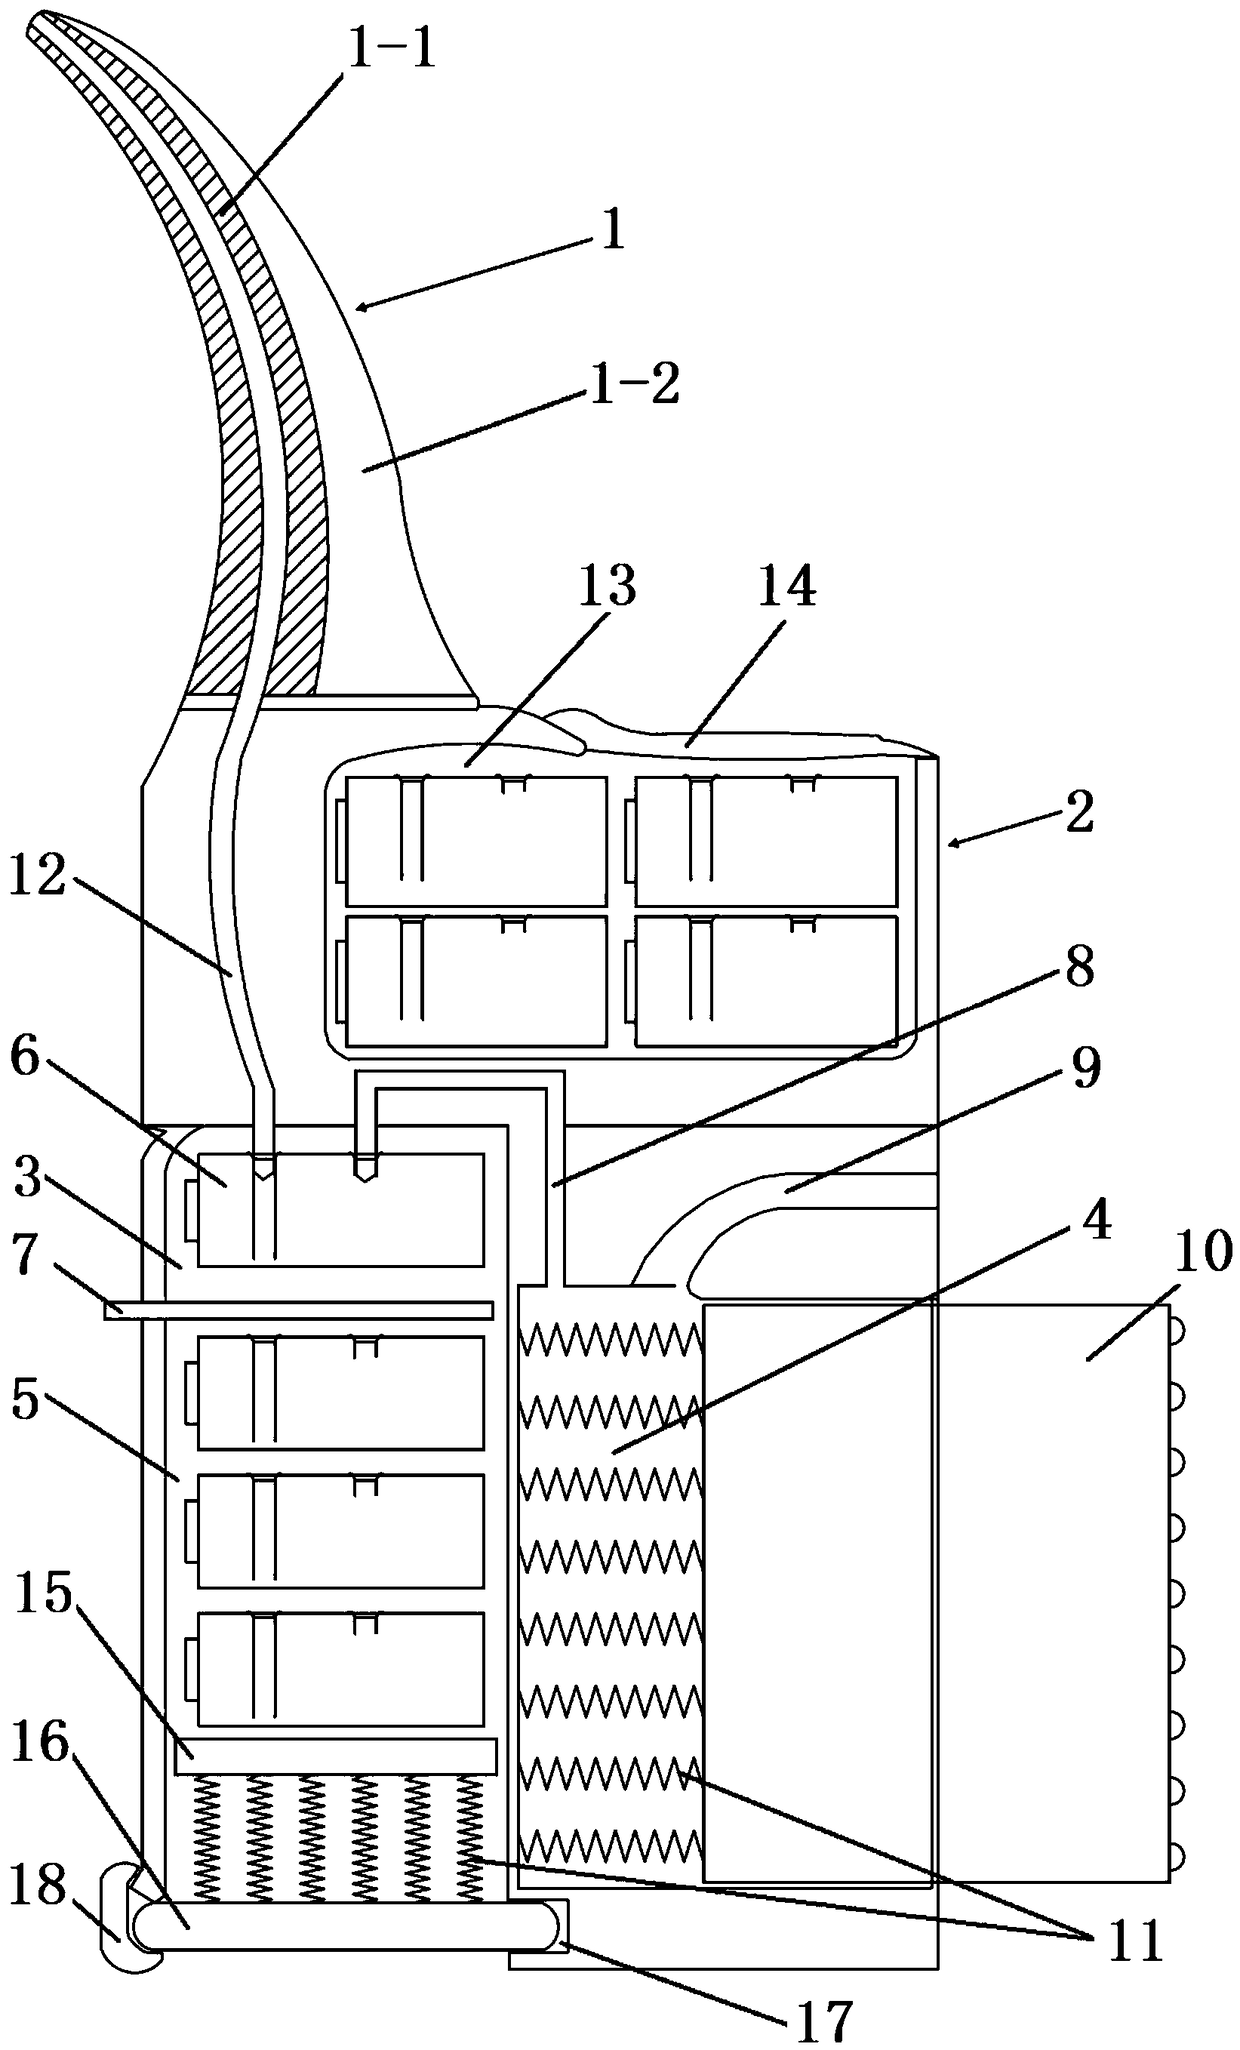 Device for quantitative intranasal brain targeting drug delivery and drug storage containers